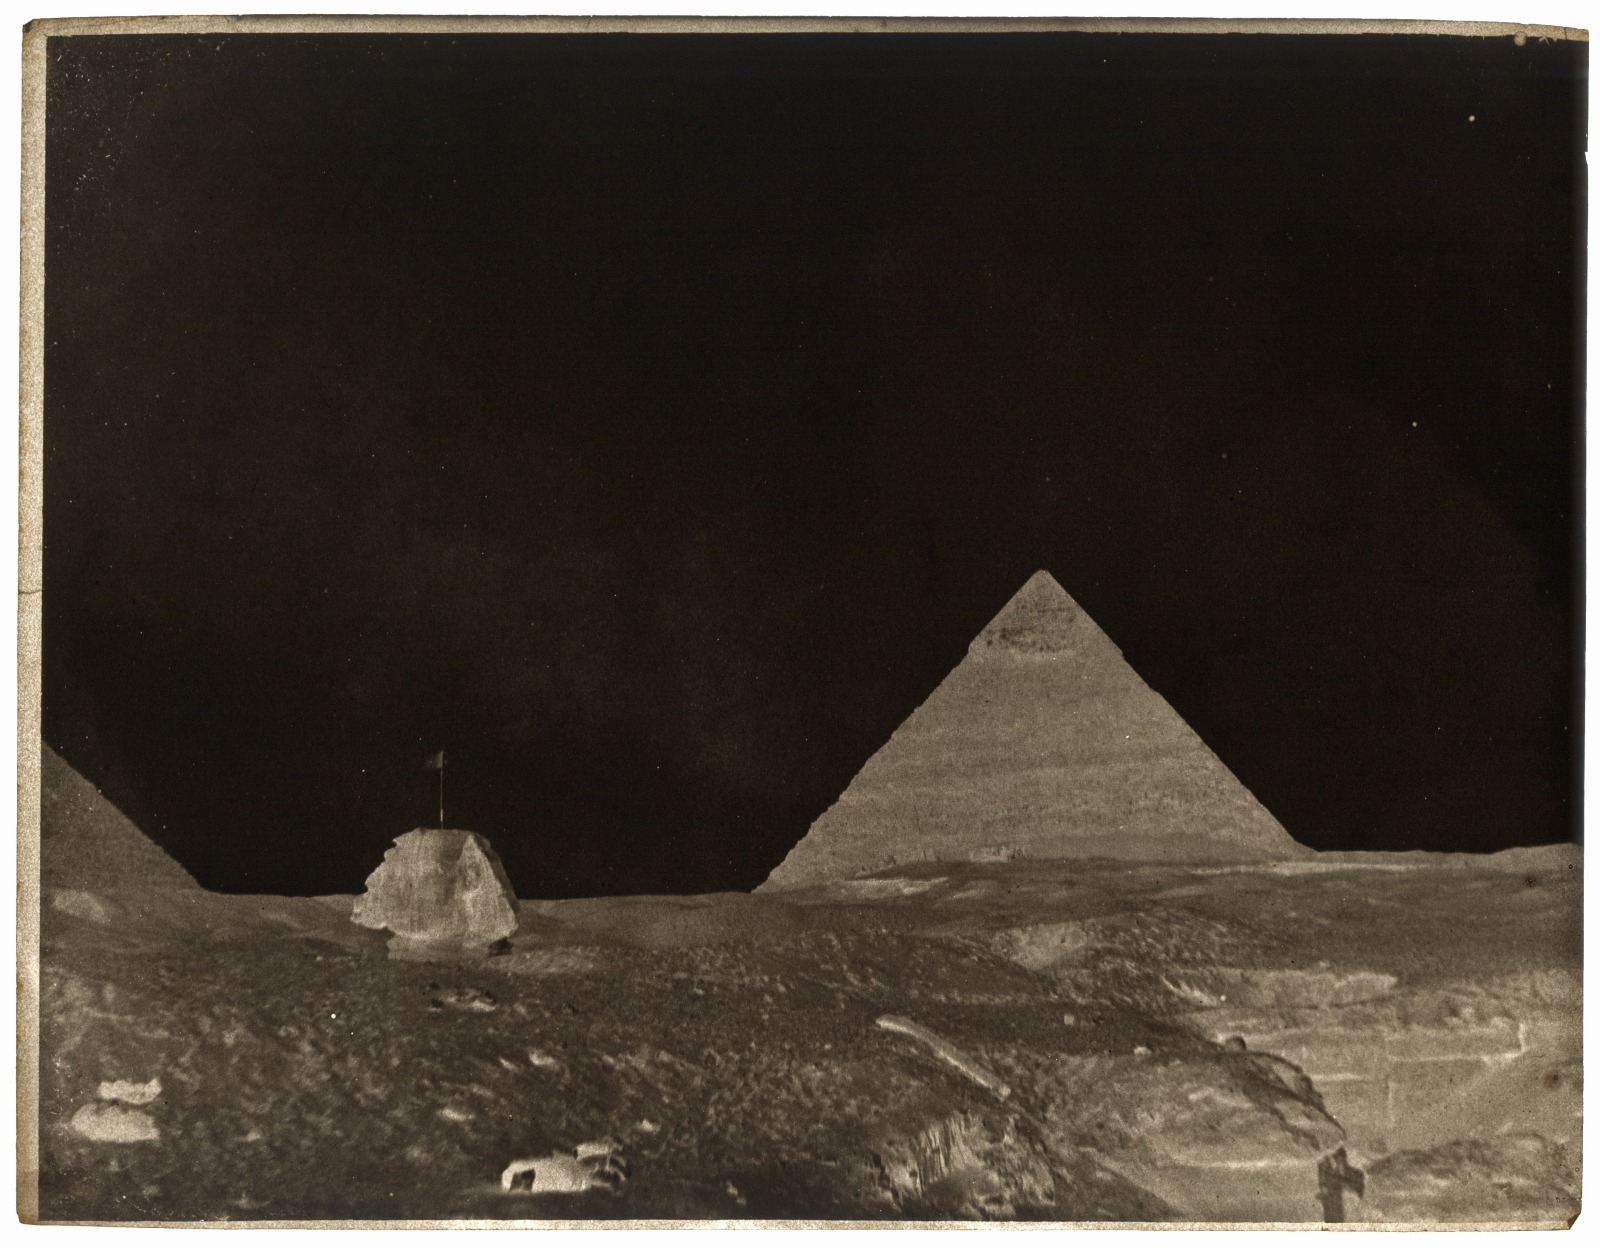 An inverted image of the Egyptian pyramids with a dark sky